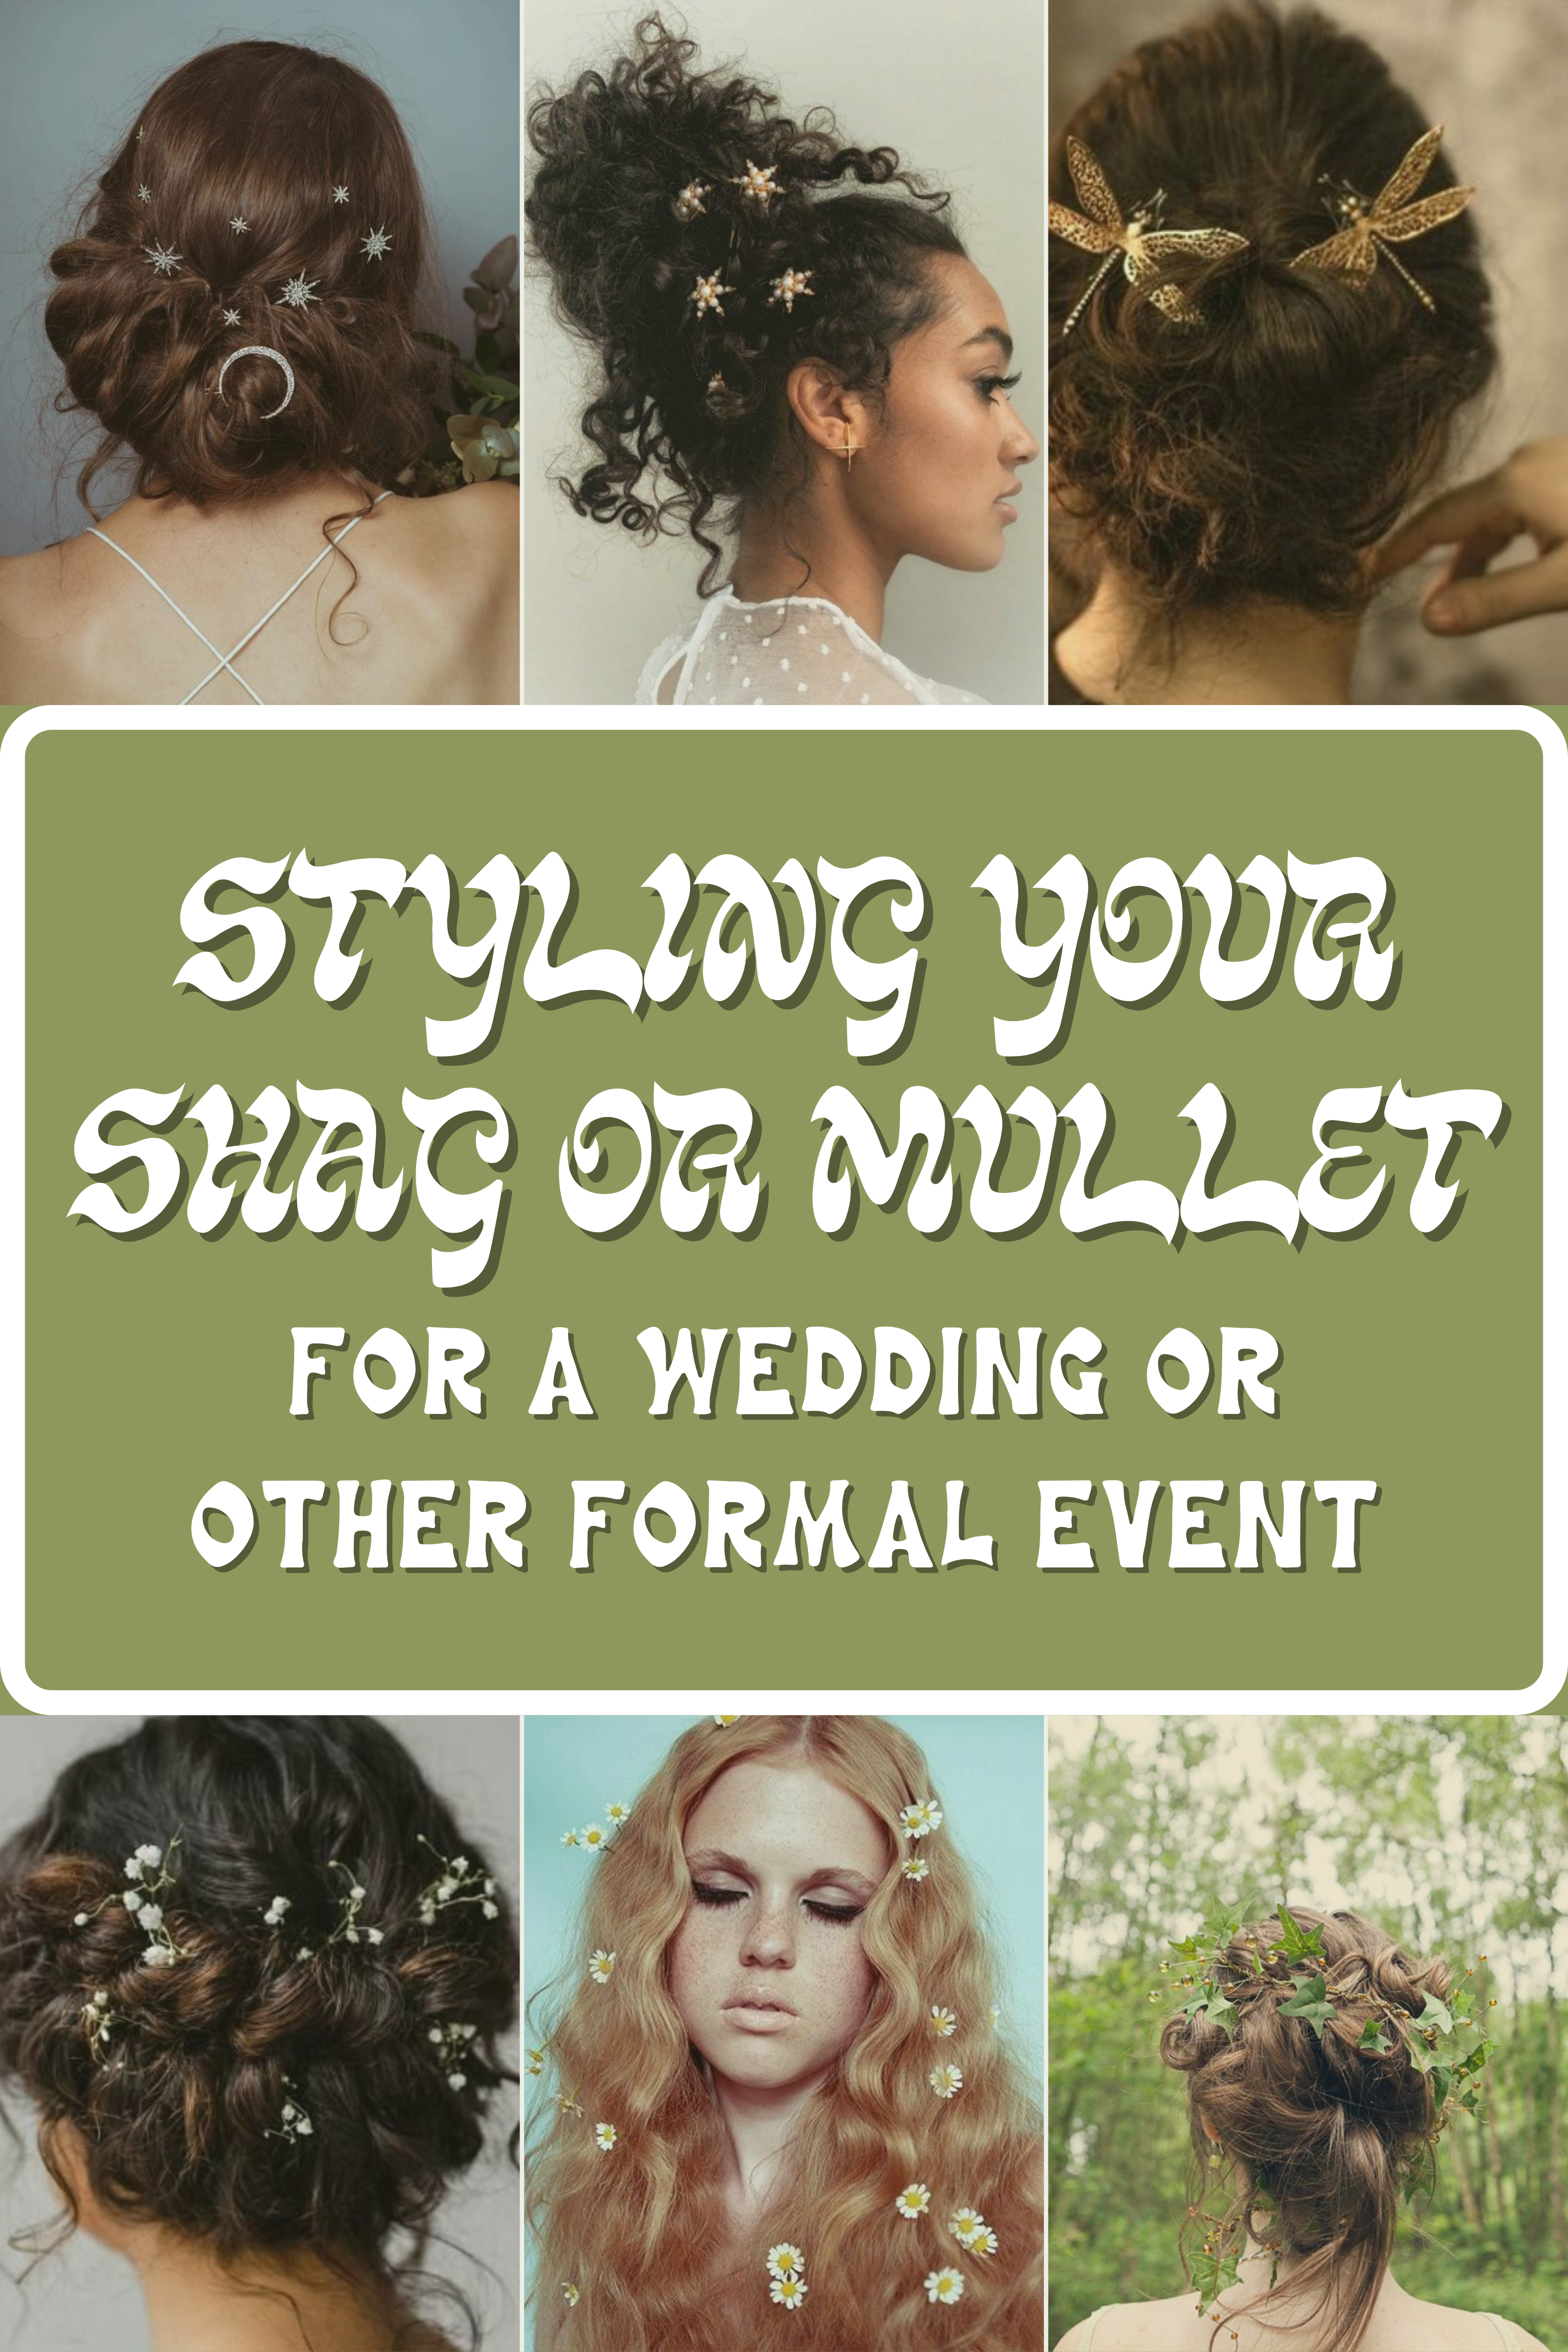 25 Special Occasion Hairstyles - The Right Hairstyles | Long hair styles,  Special occasion hairstyles, Hair styles